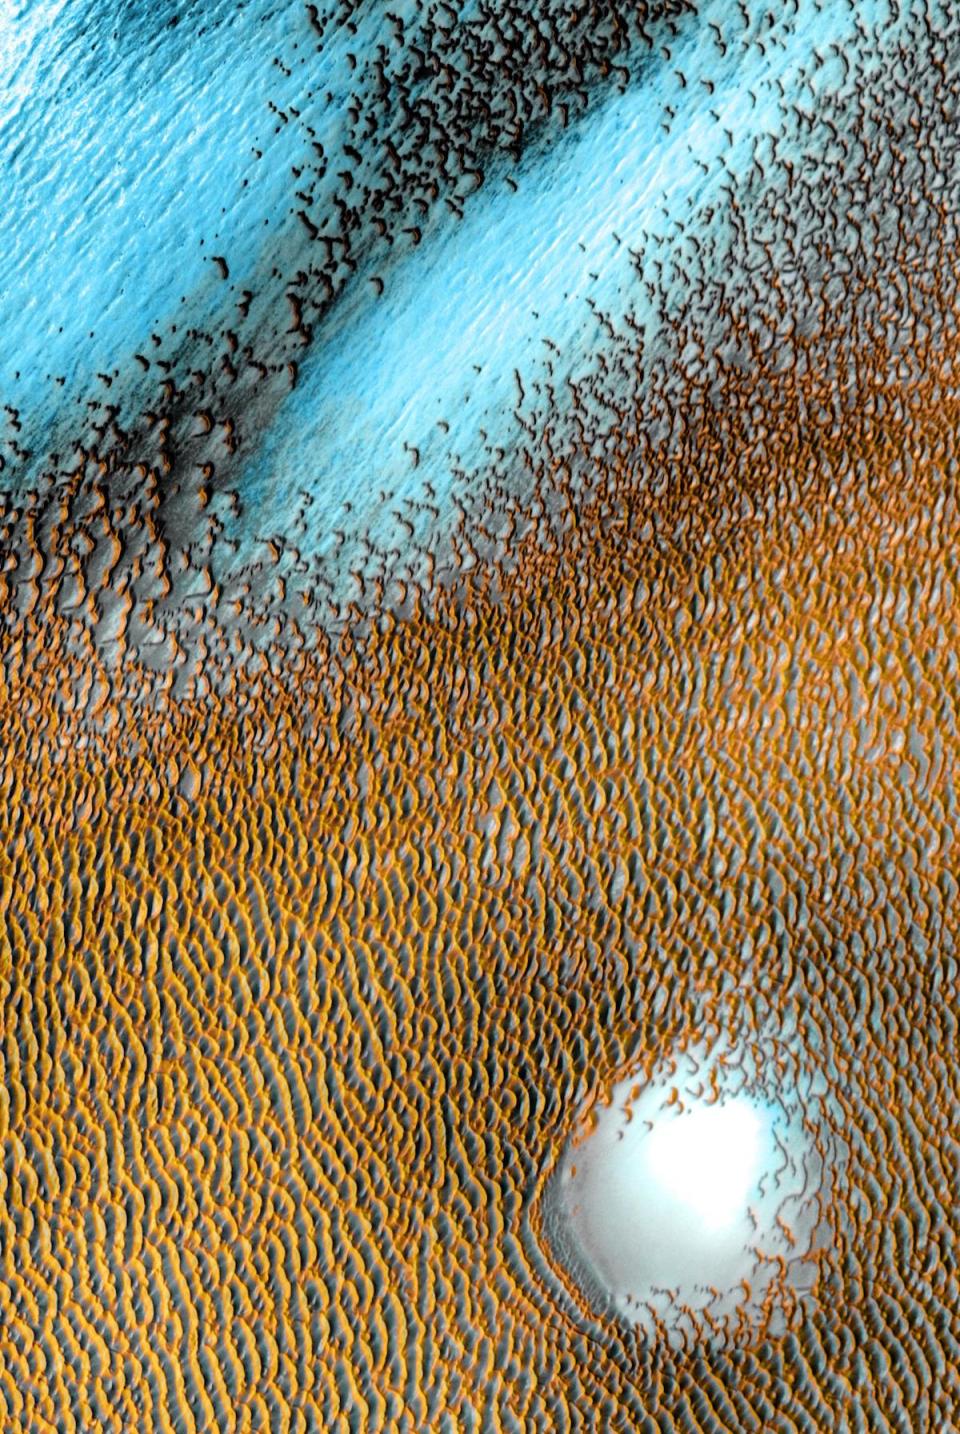 A composite image of Mars from NASA showing the planet's polar cap sand dunes, with different colors to highlight surface temperatures